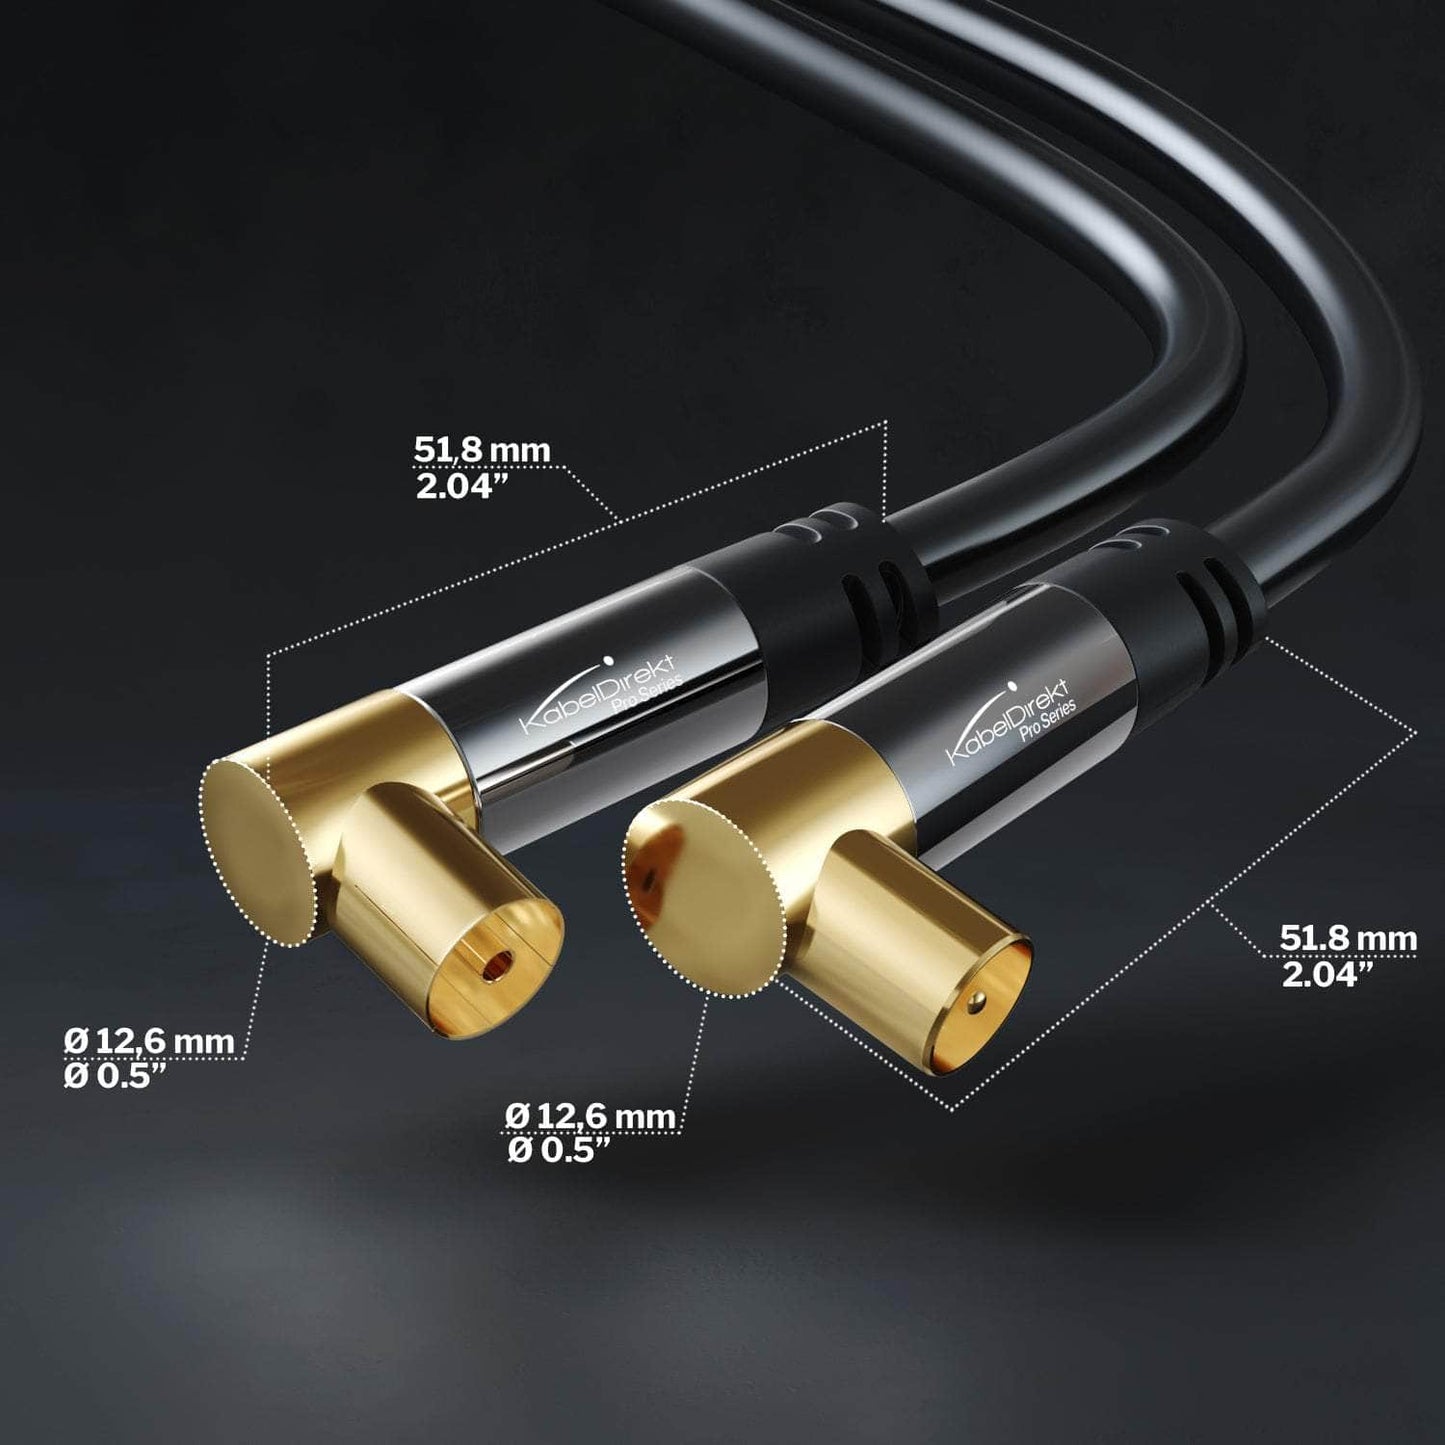 HDTV aerial / coaxial cable, 90° angled female connector to angled male connector